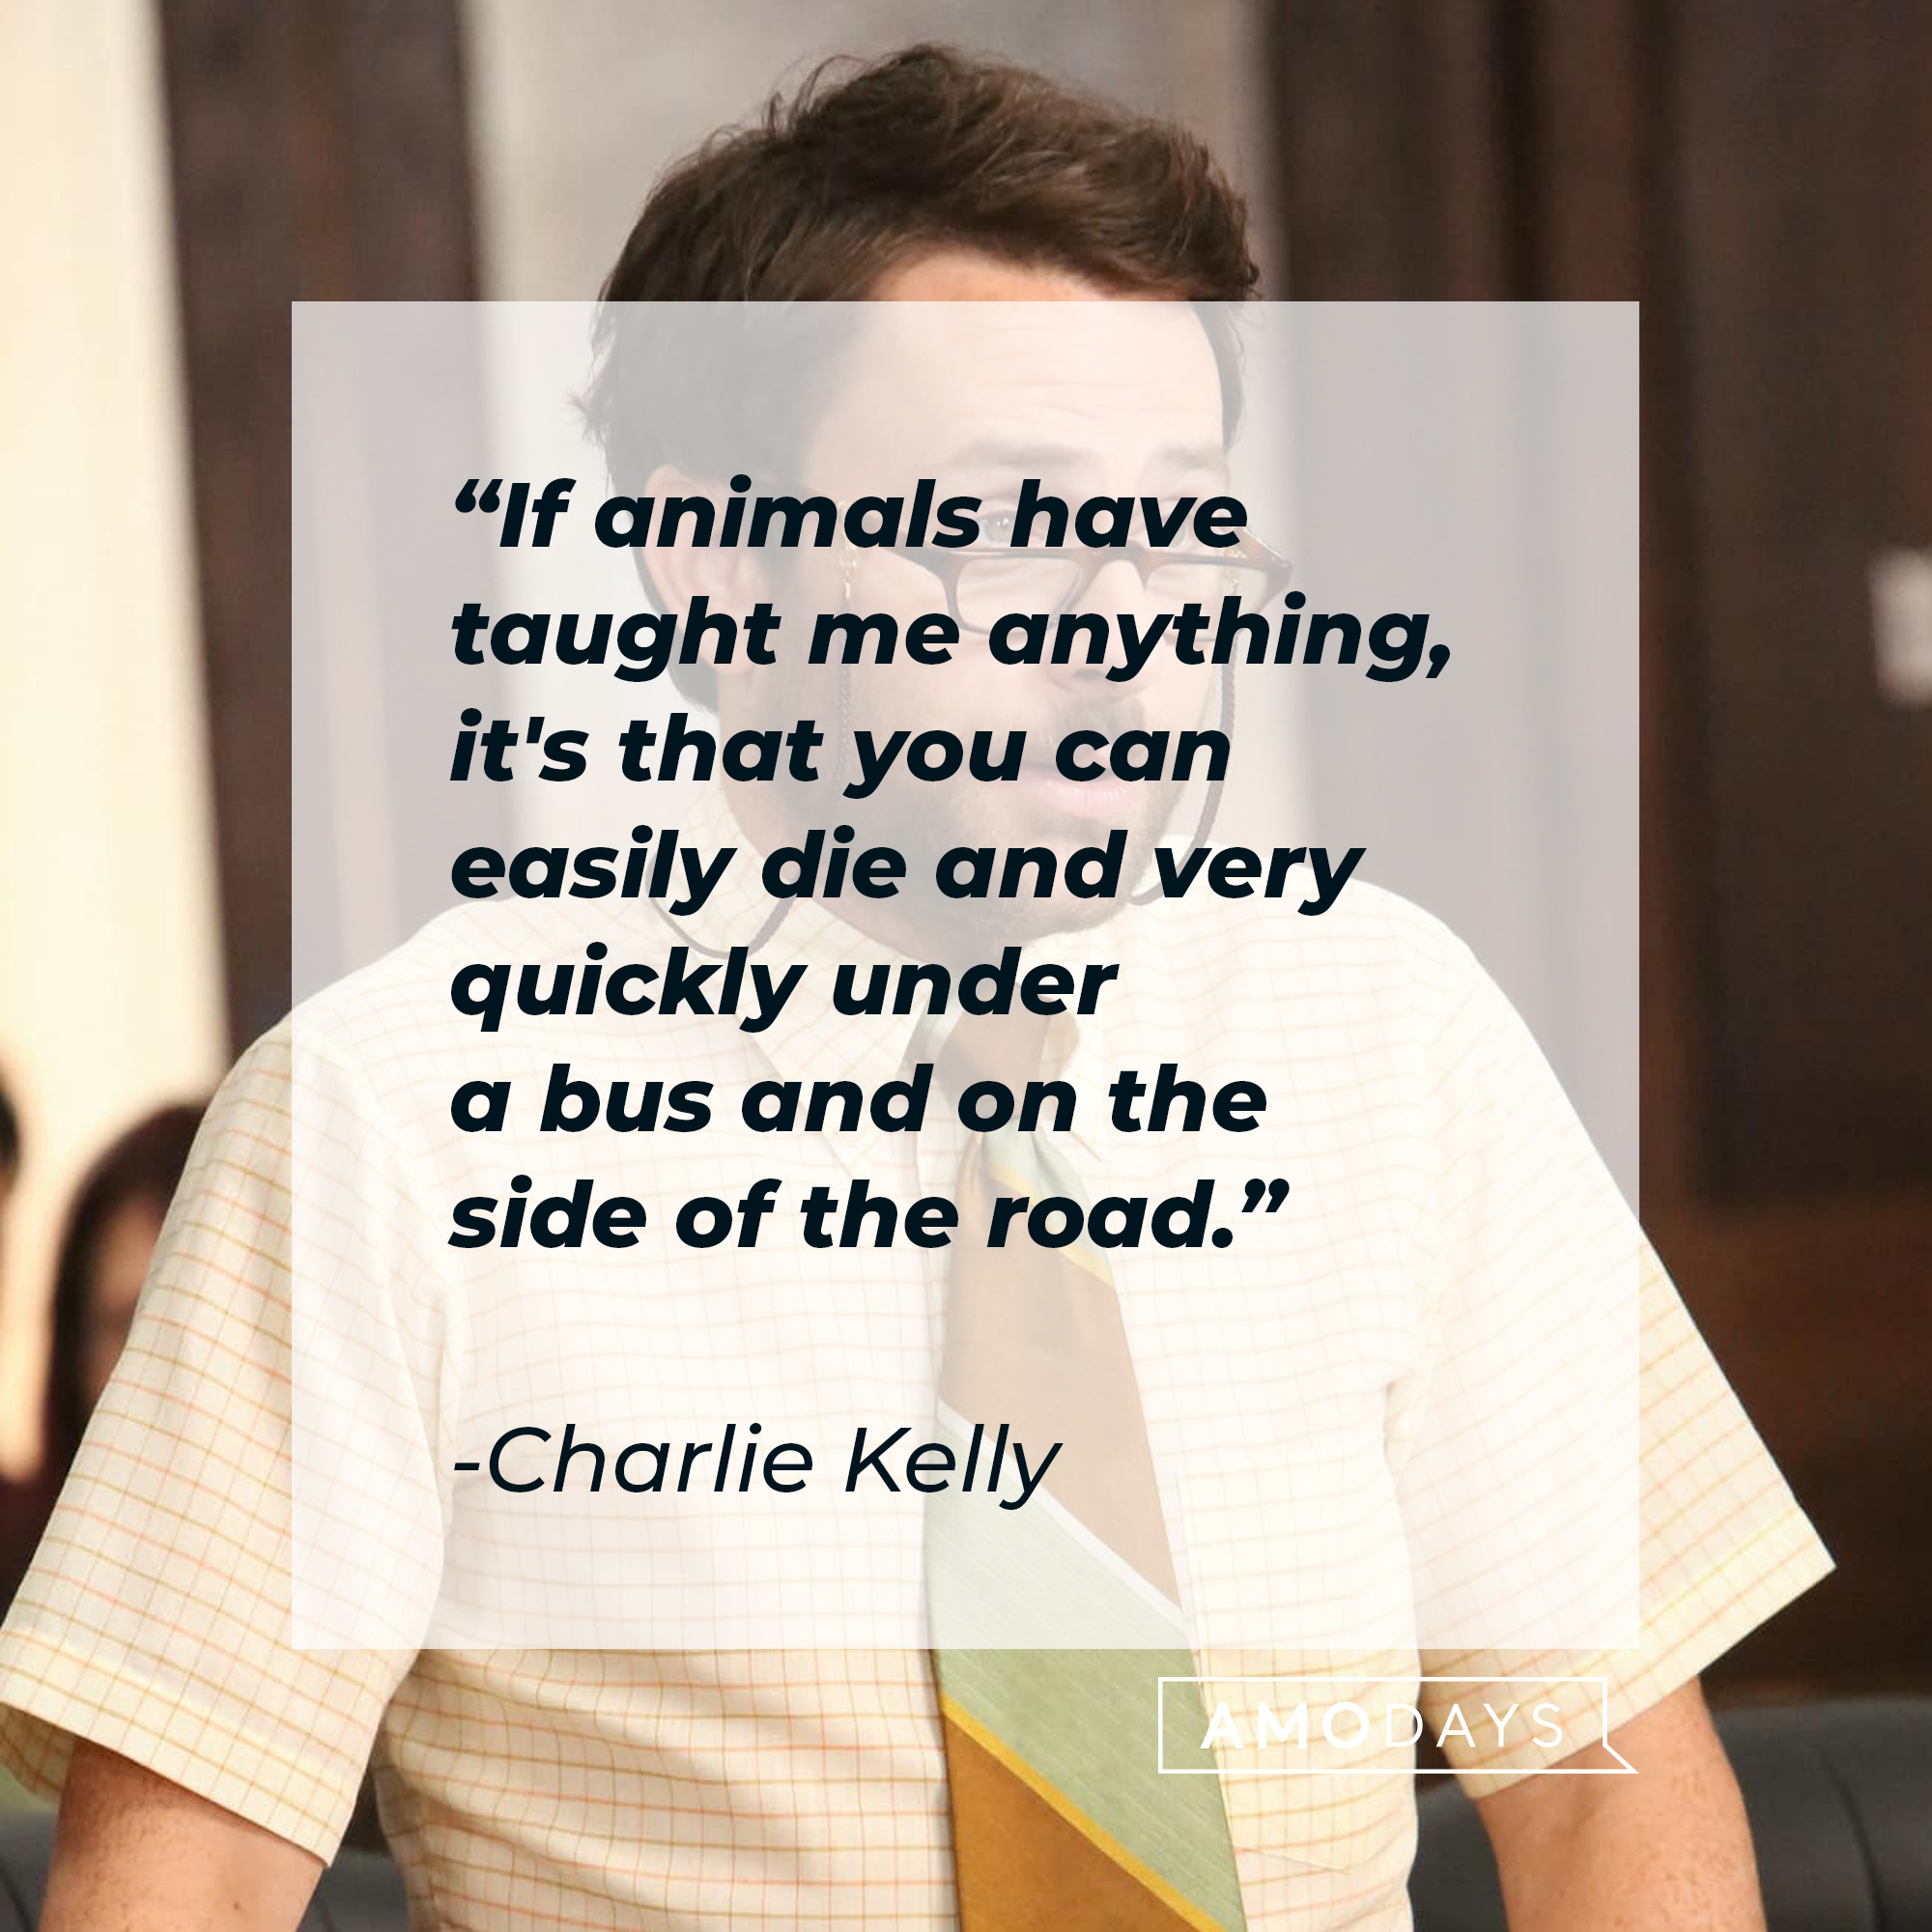 Charlie Kelly with his quote: "If animals have taught me anything, it's that you can easily die and very quickly under a bus and on the side of the road." | Source: Facebook/alwayssunny